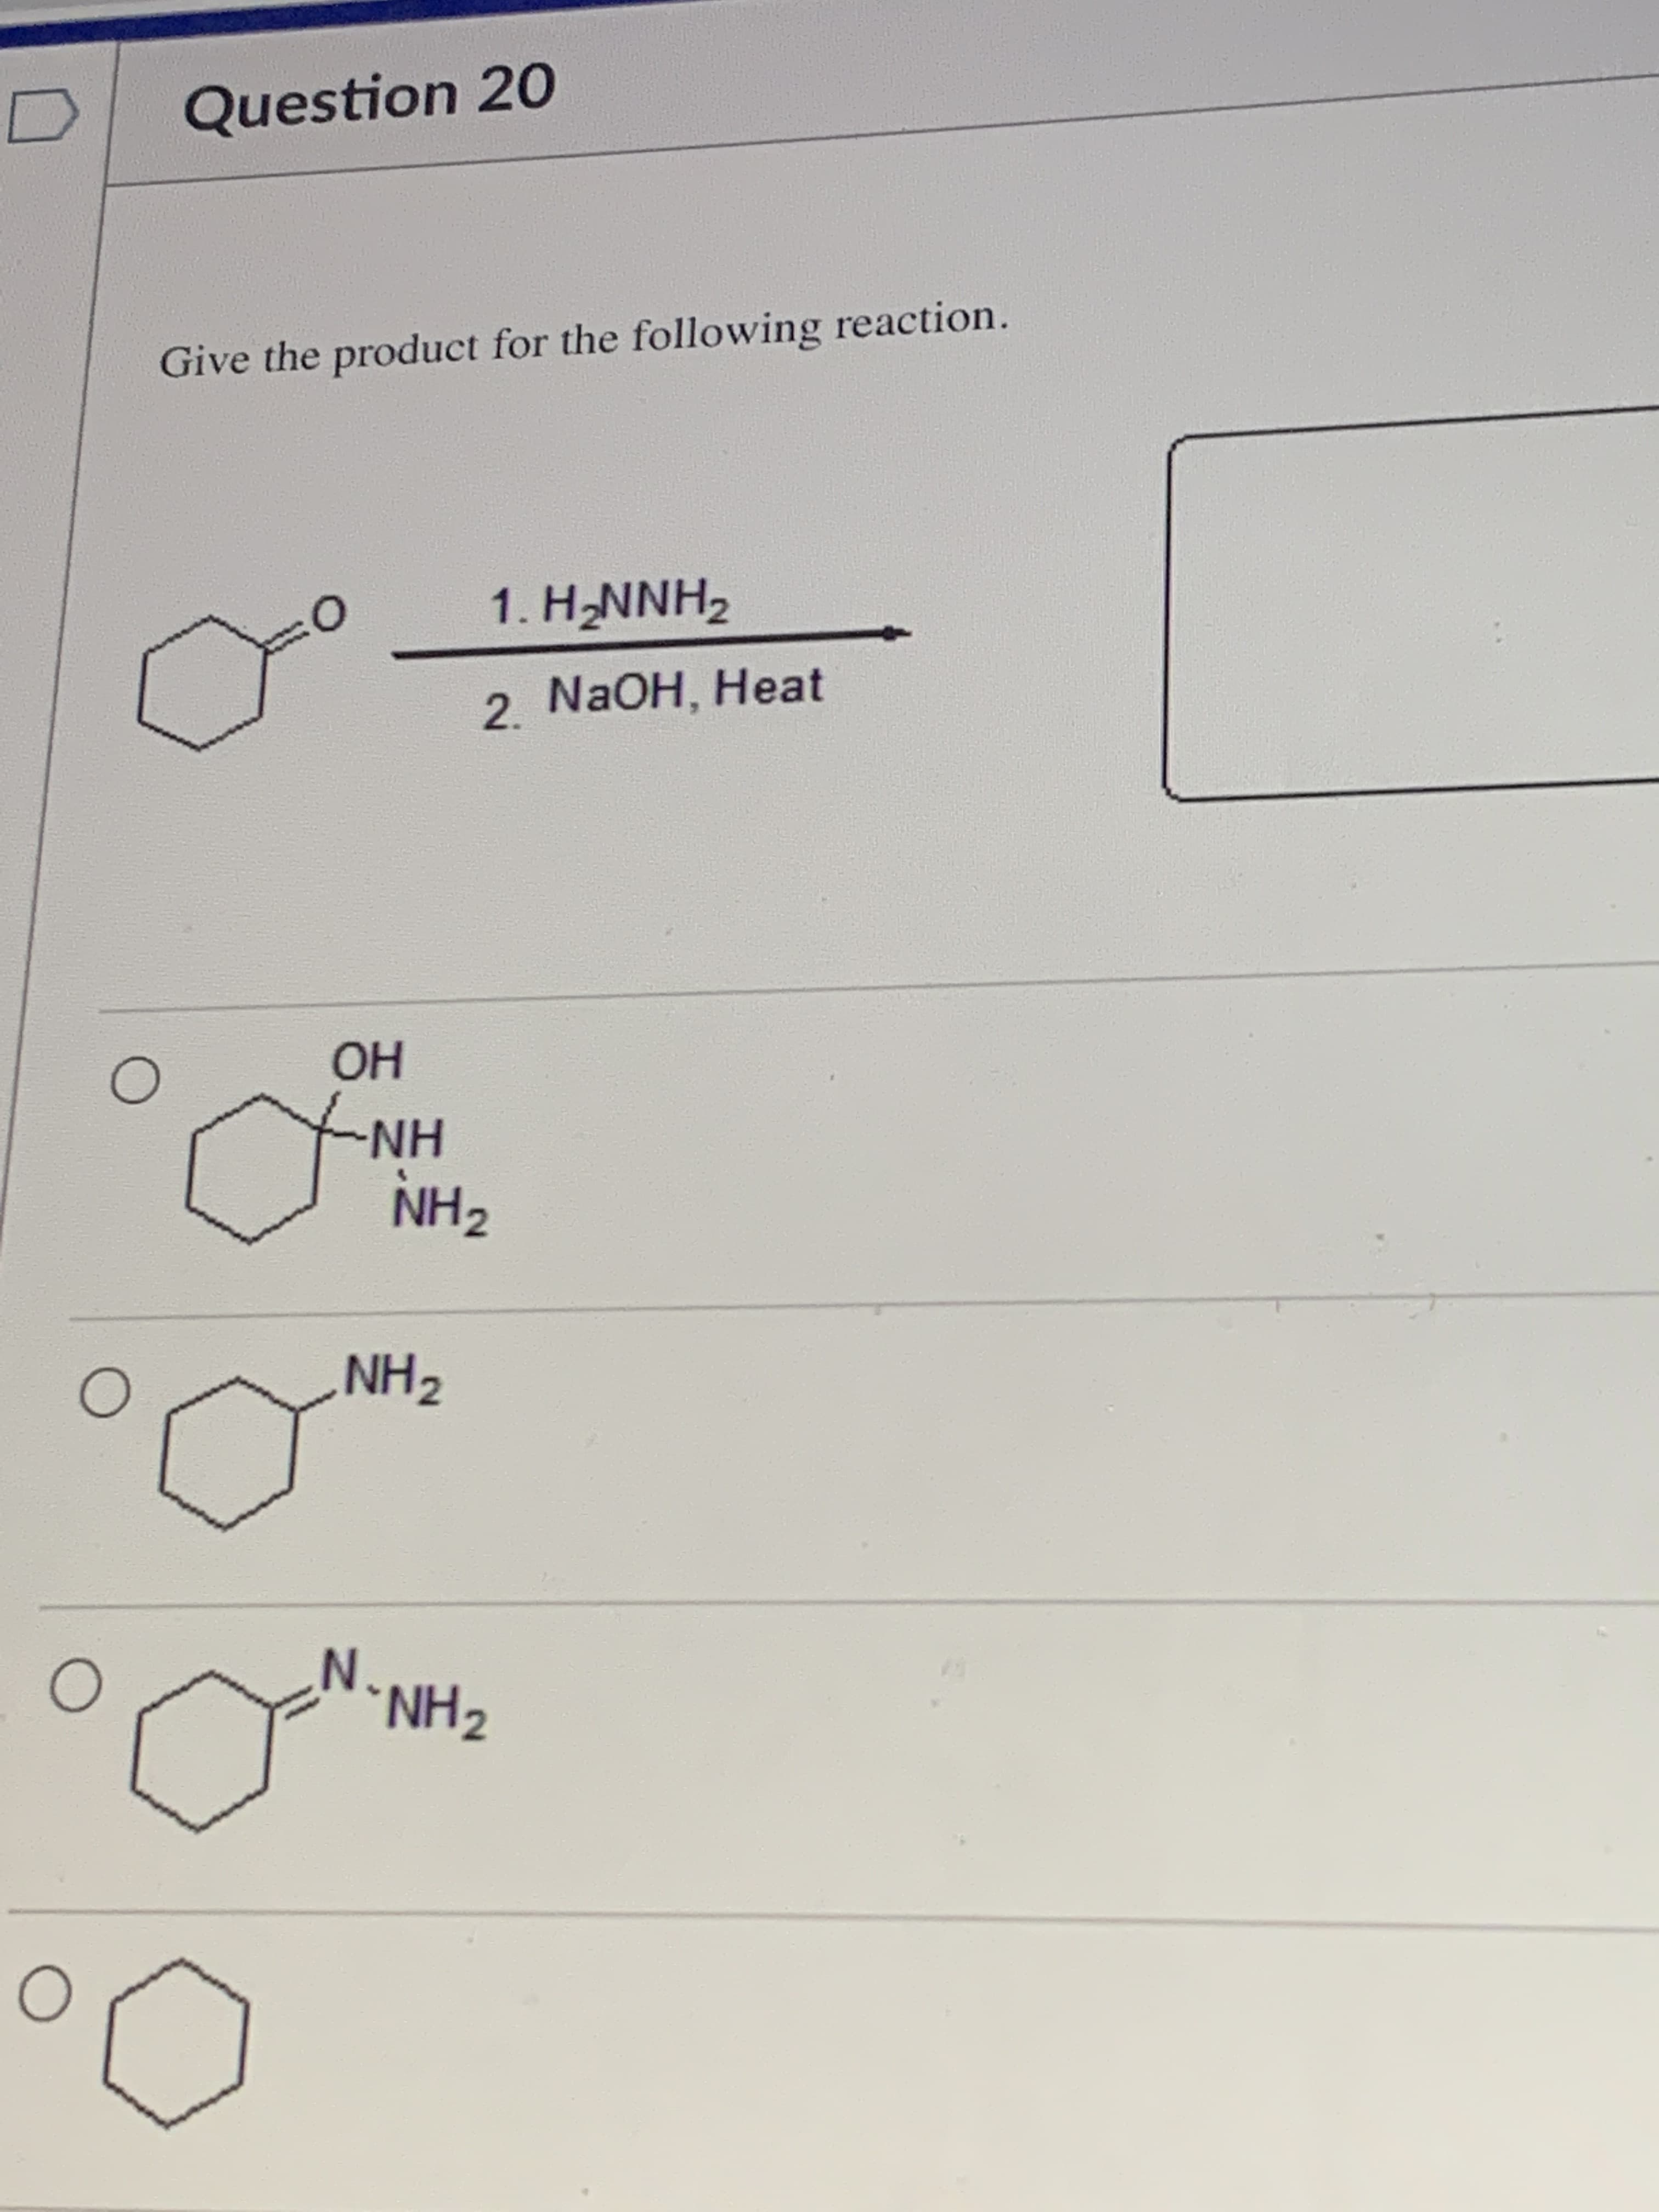 Give the product for the following reaction.
1. H2NNH2
2 N2OH, Heat
OH
NH
NH2
NH2
N.
